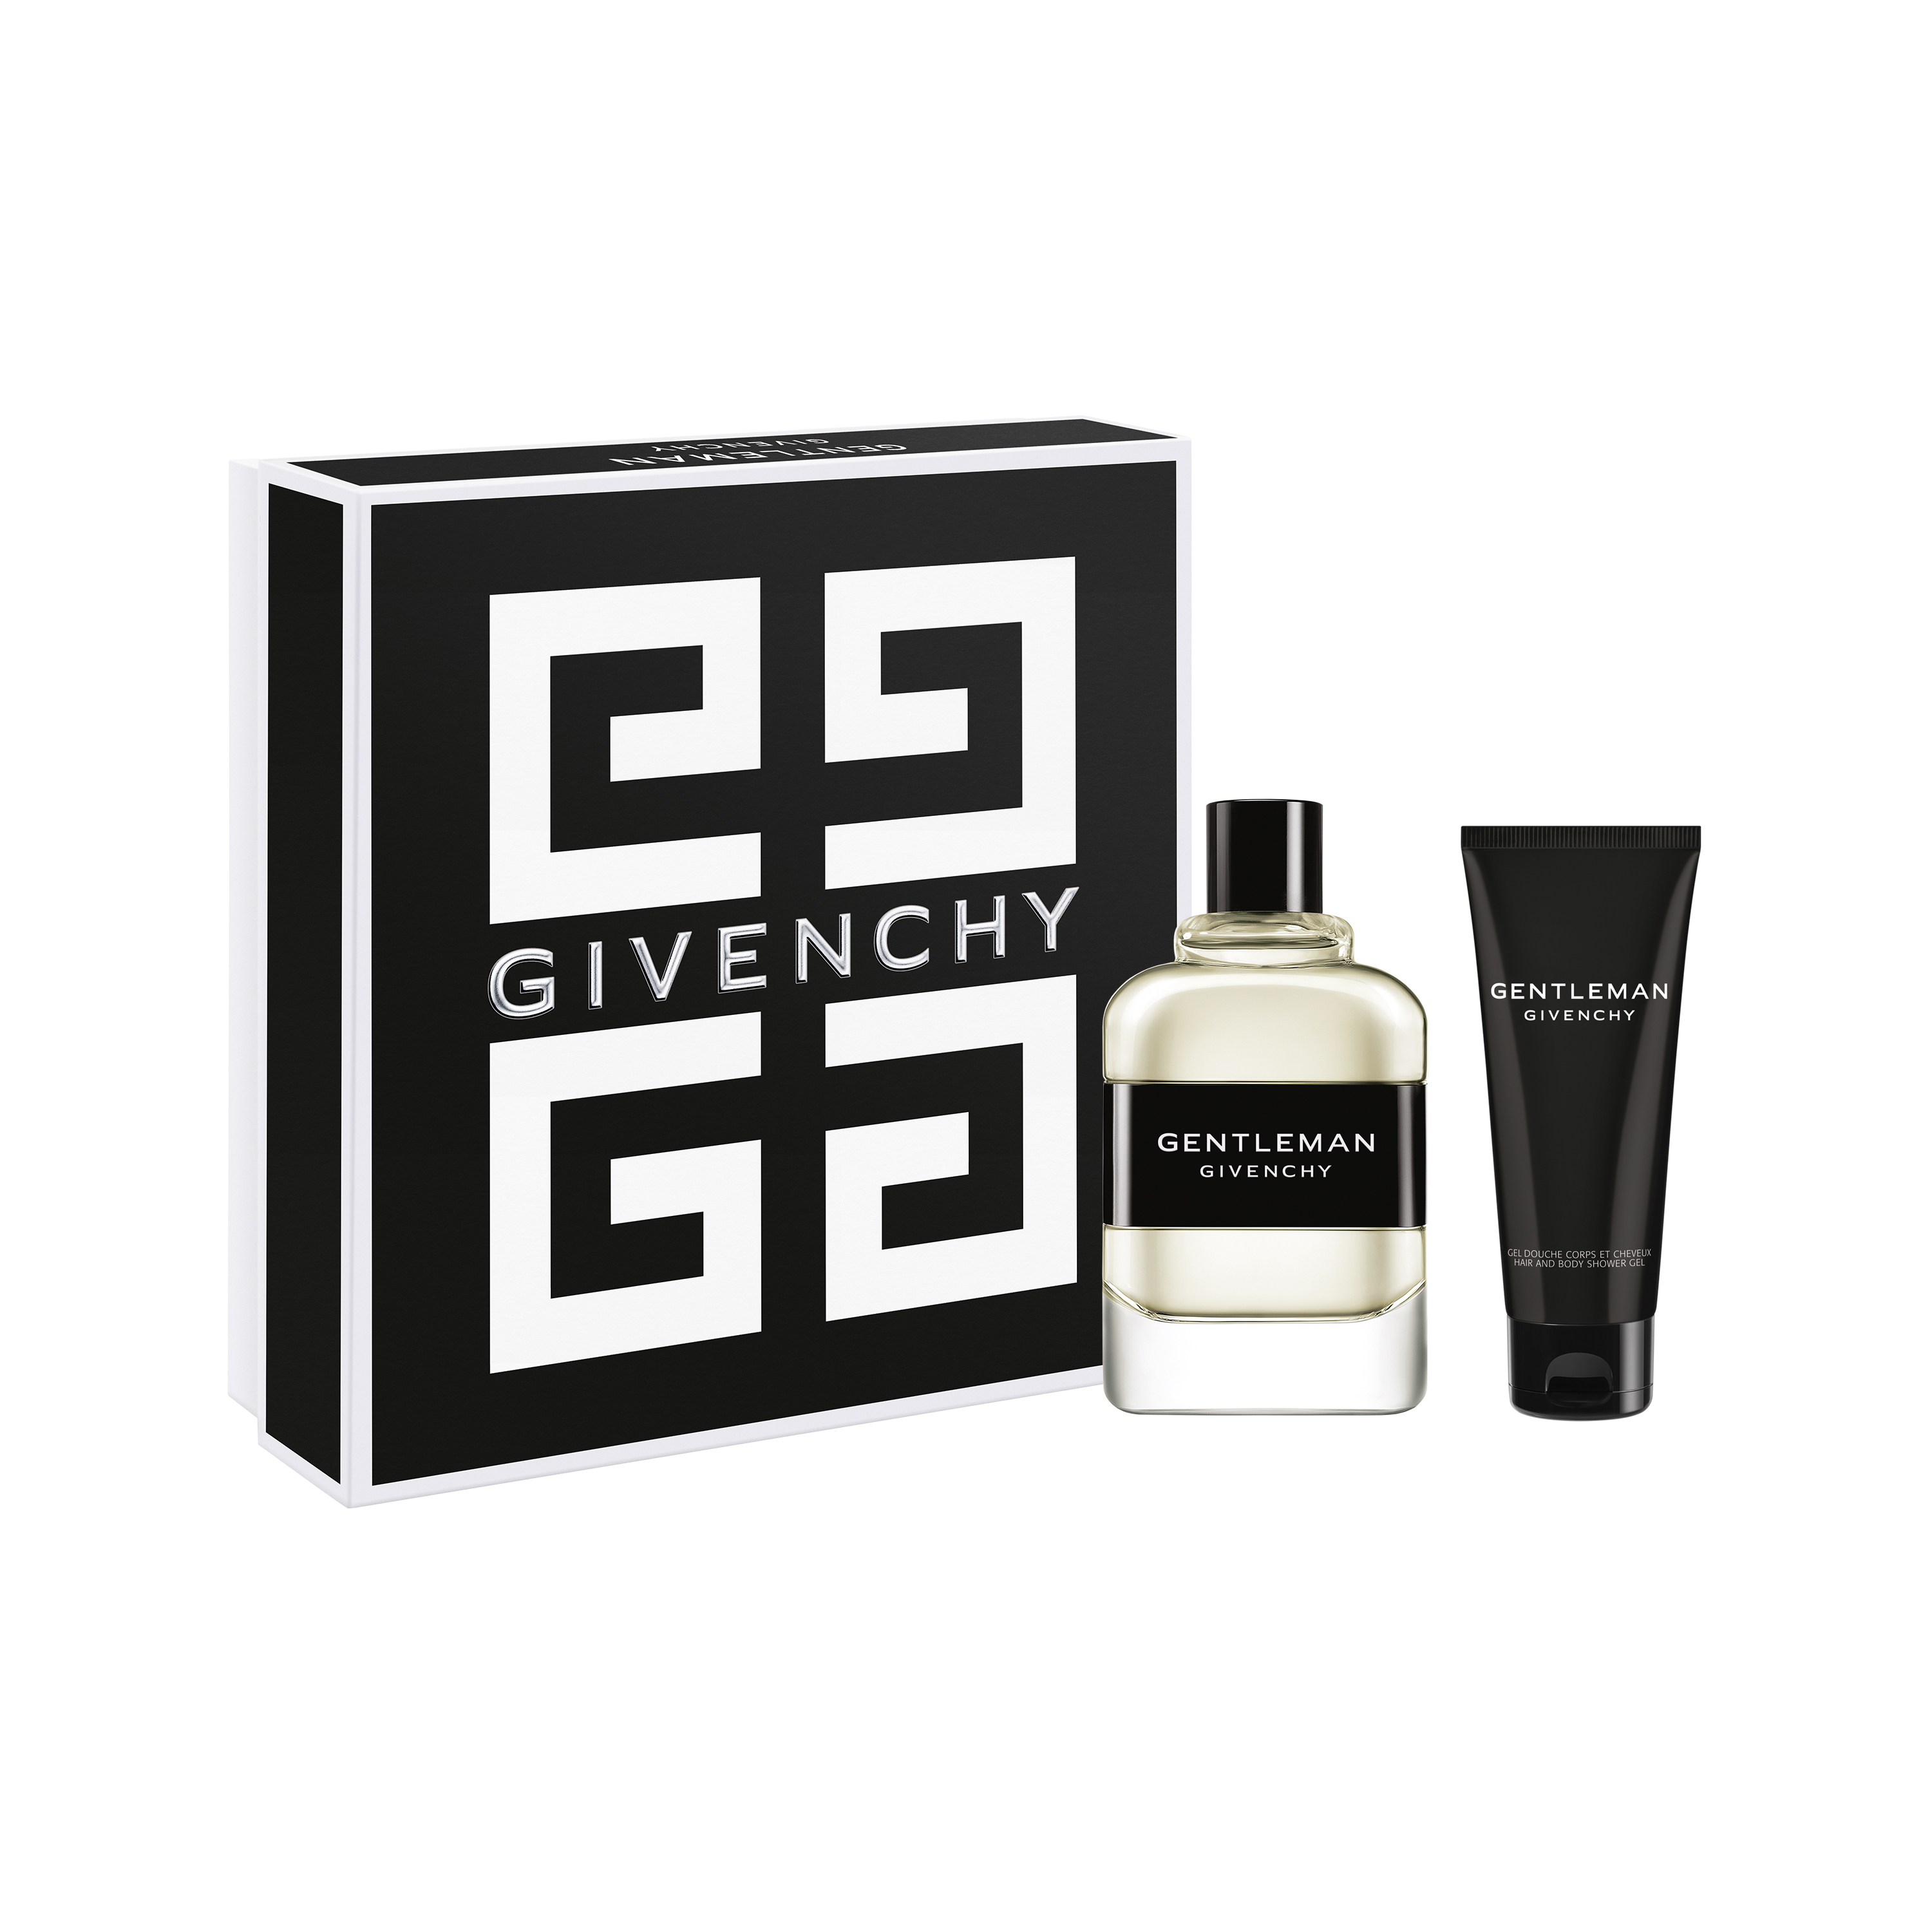 Givenchy promotion